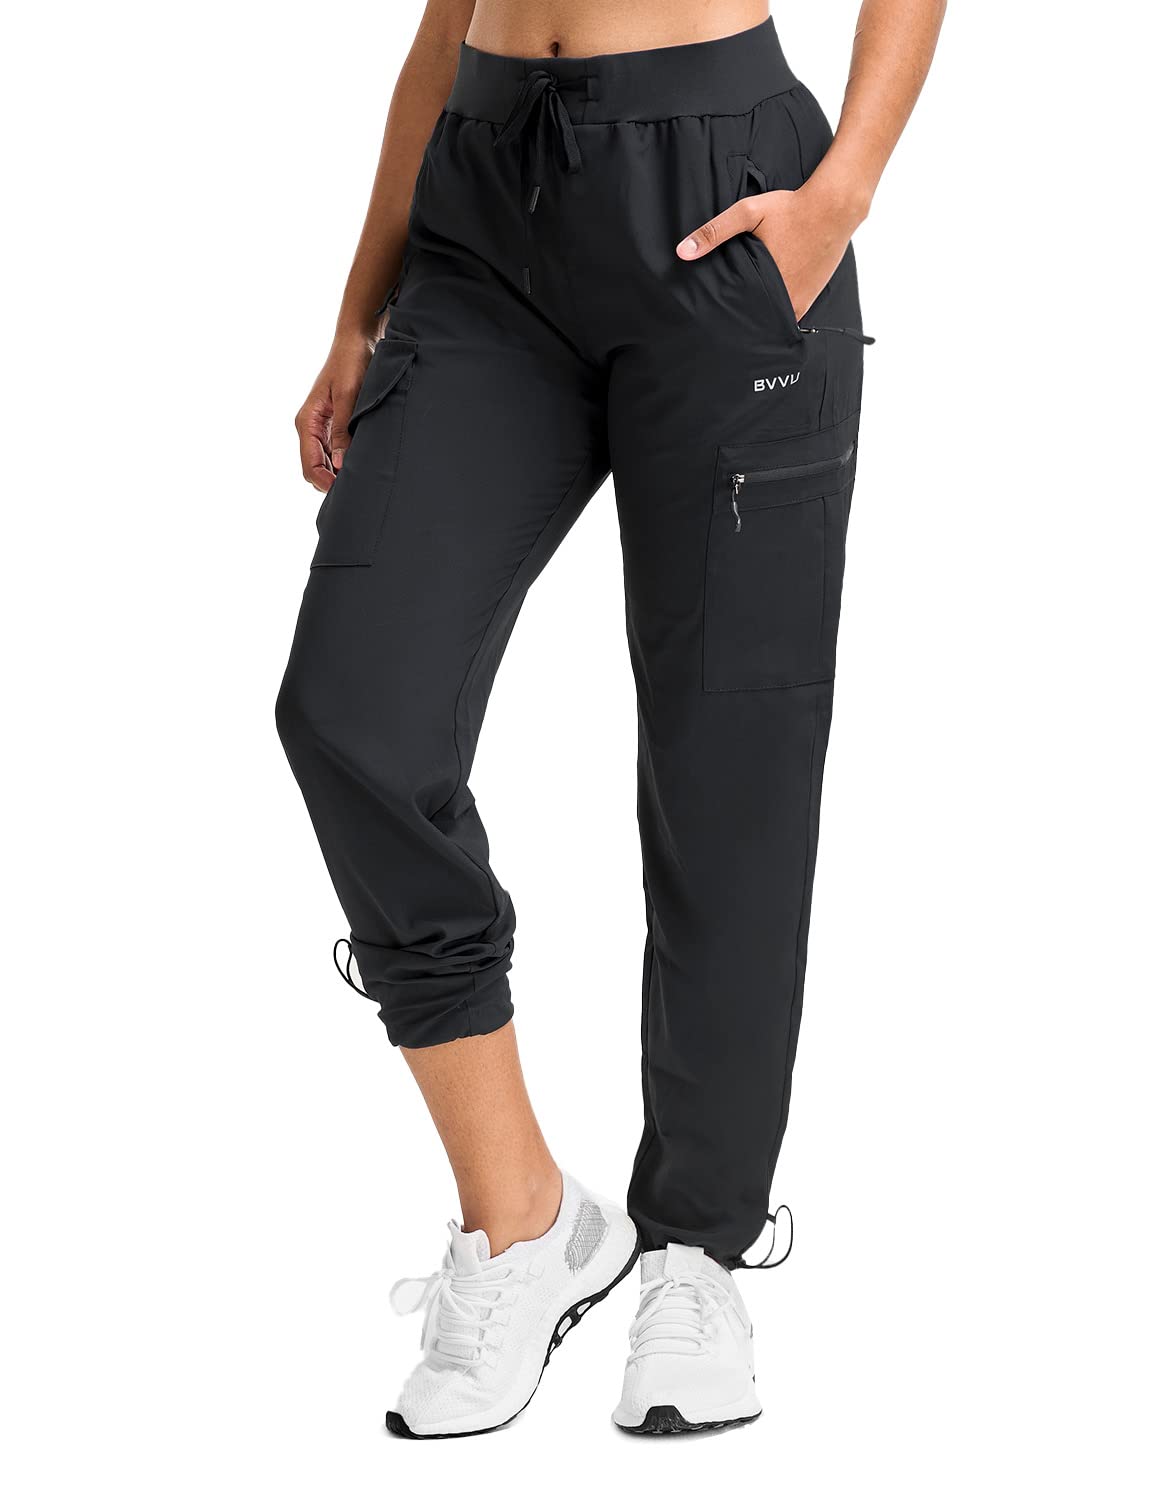 Women's Cargo Joggers Hiking Pants Lightweight Quick Dry with Zipper  Pockets High Waist Sport Athletic Travel Pants